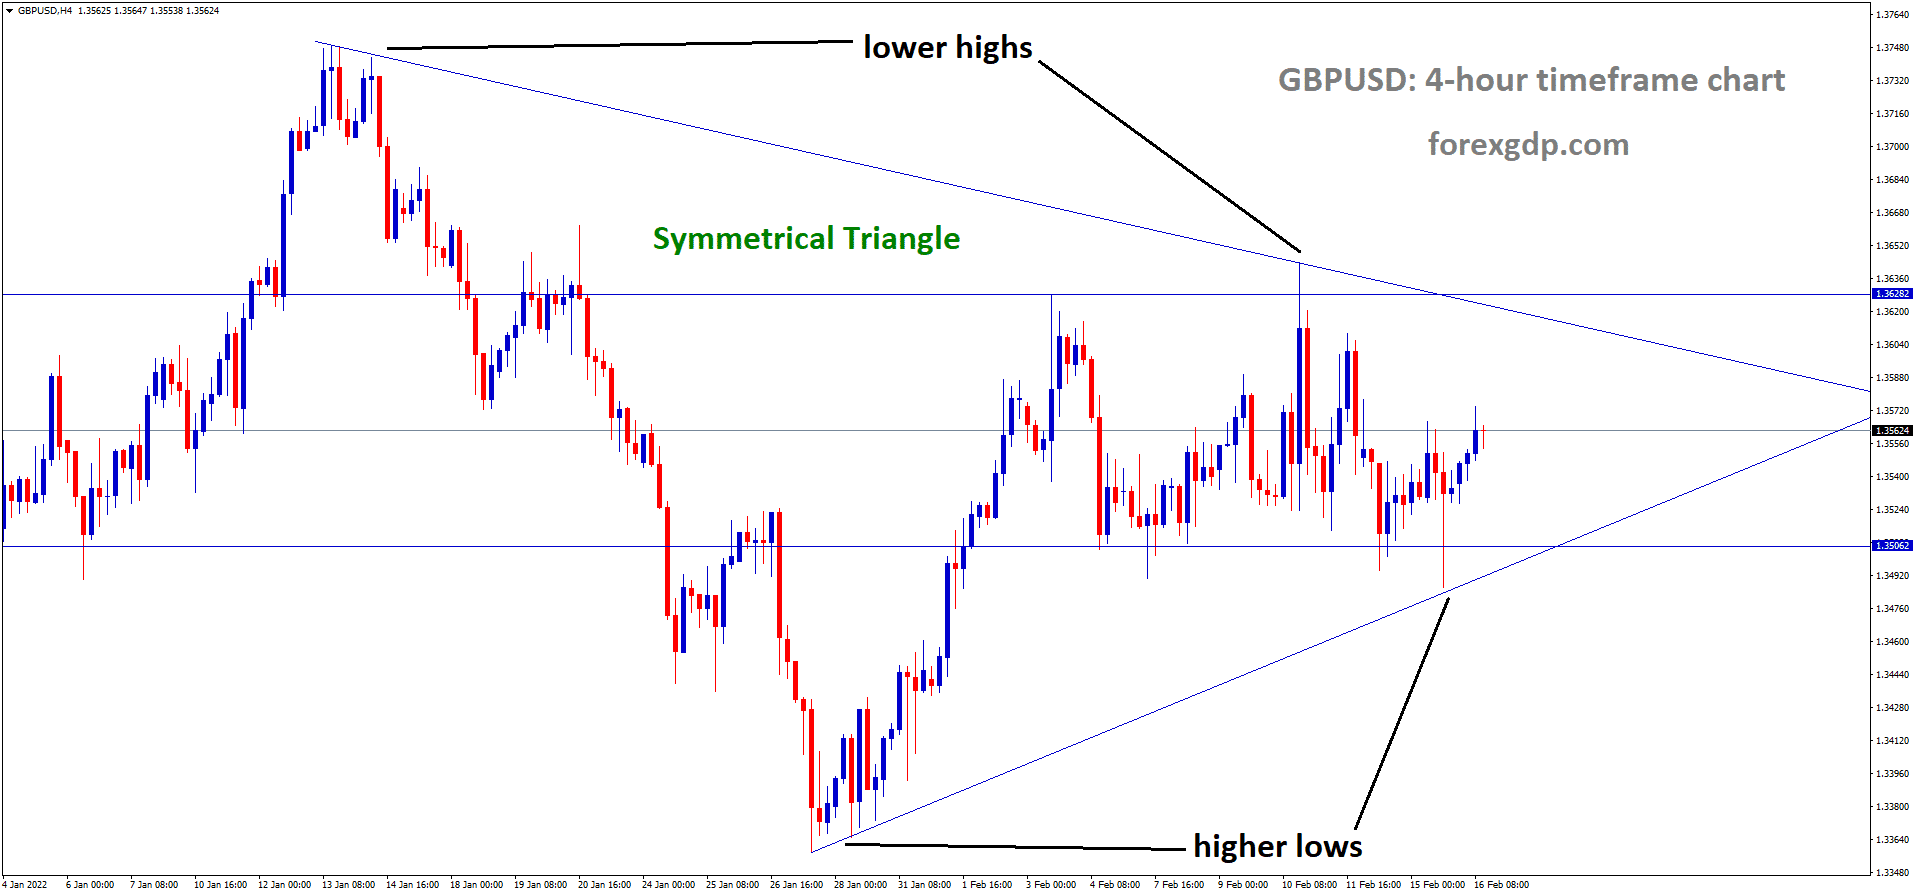 GBPUSD is moving in the Symmetrical triangle pattern and the market has rebounded from the Bottom area of the pattern